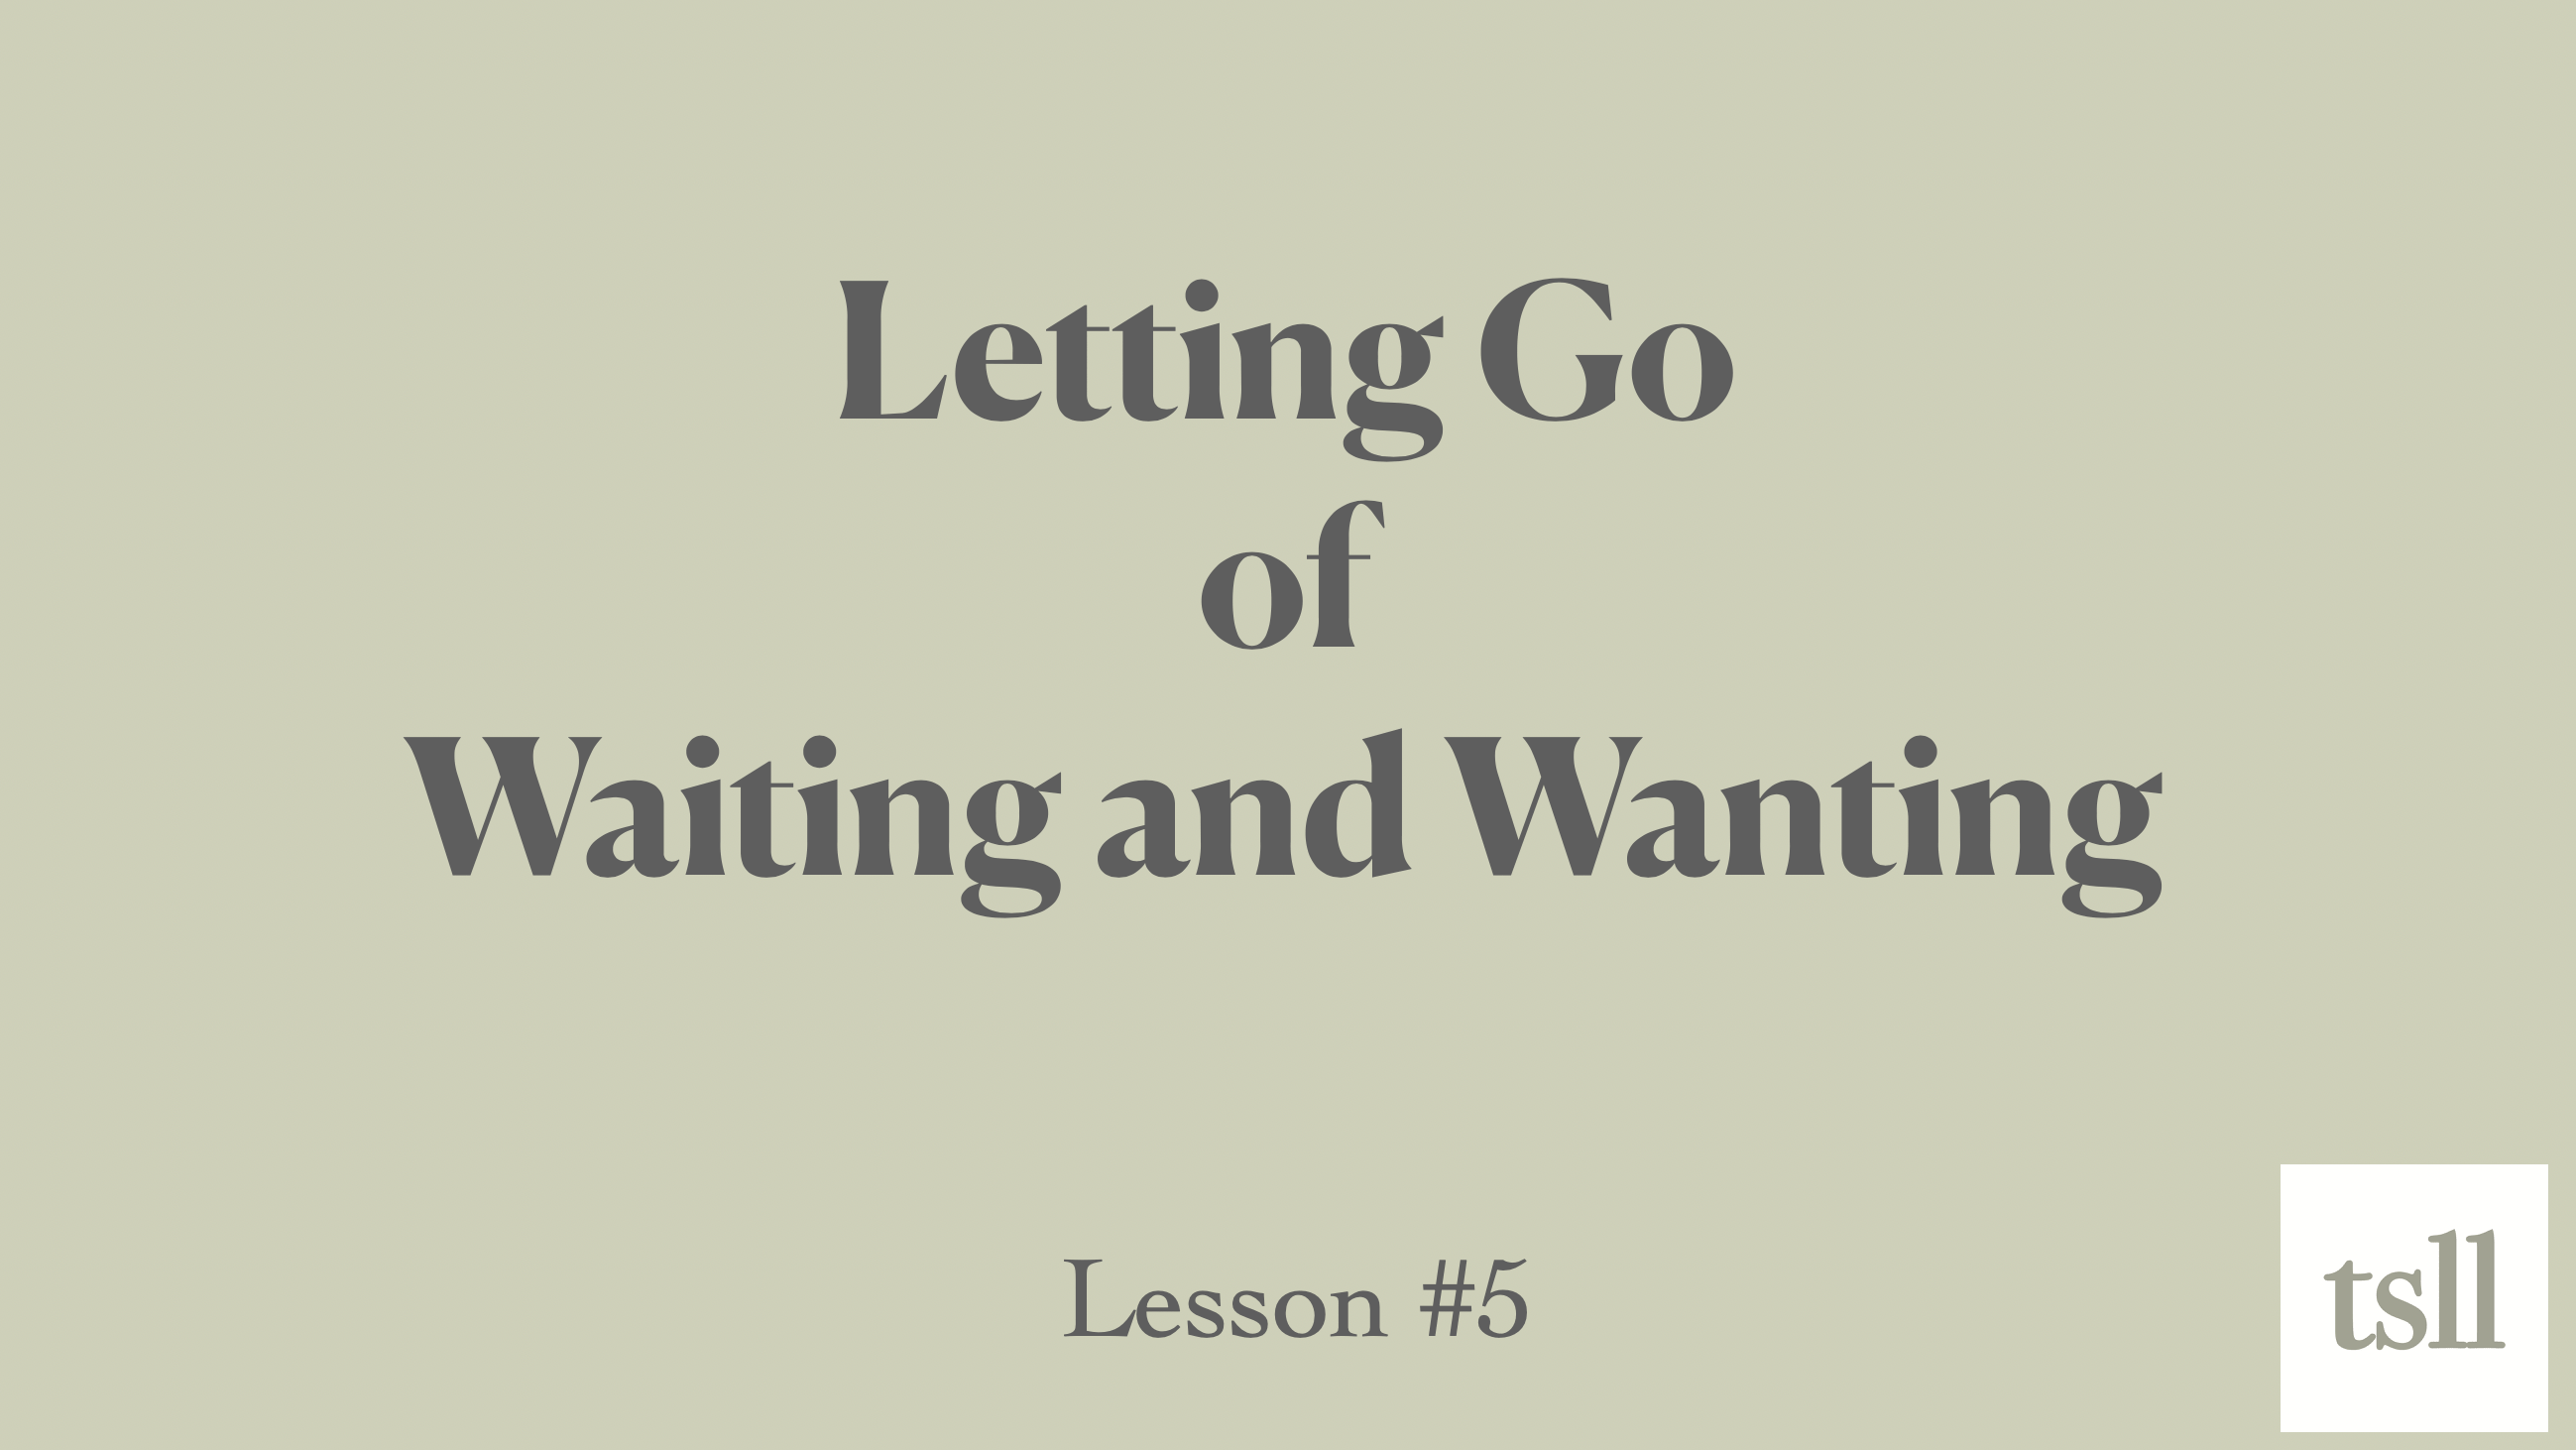 Part 3: Letting Go of Waiting and Wanting (6:04)